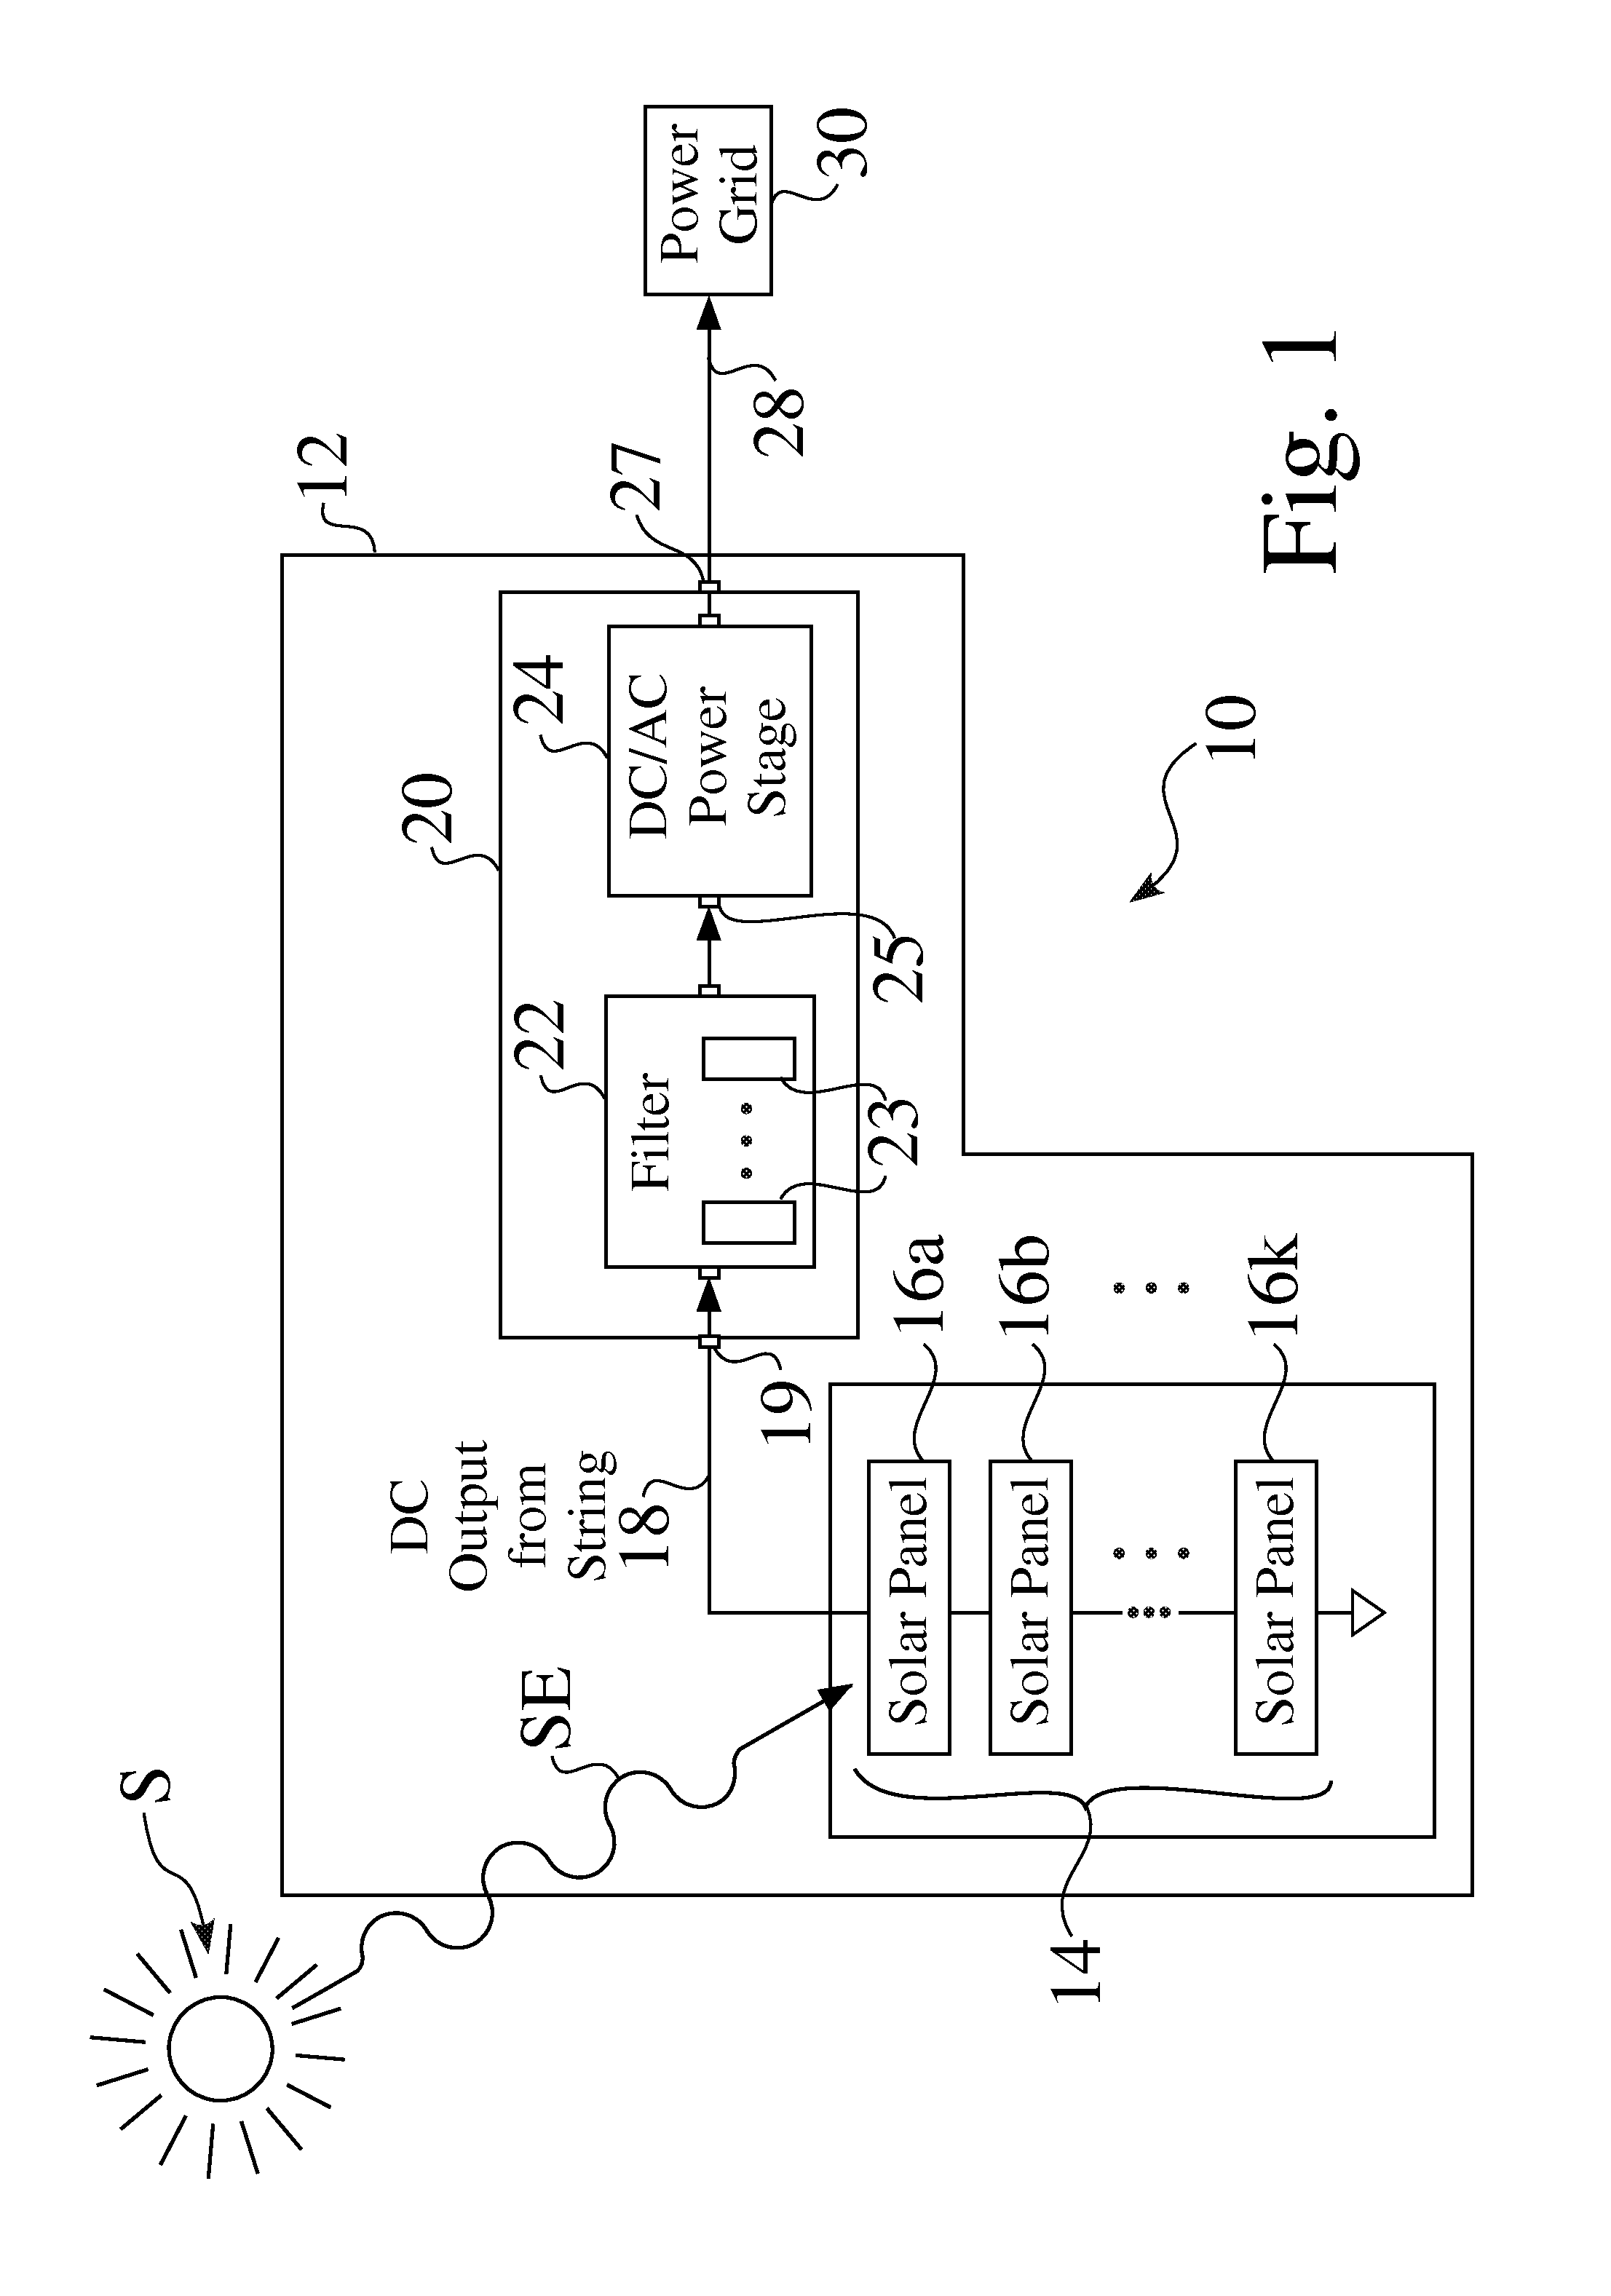 Low filter capacitance power systems, structures, and processes for solar plants